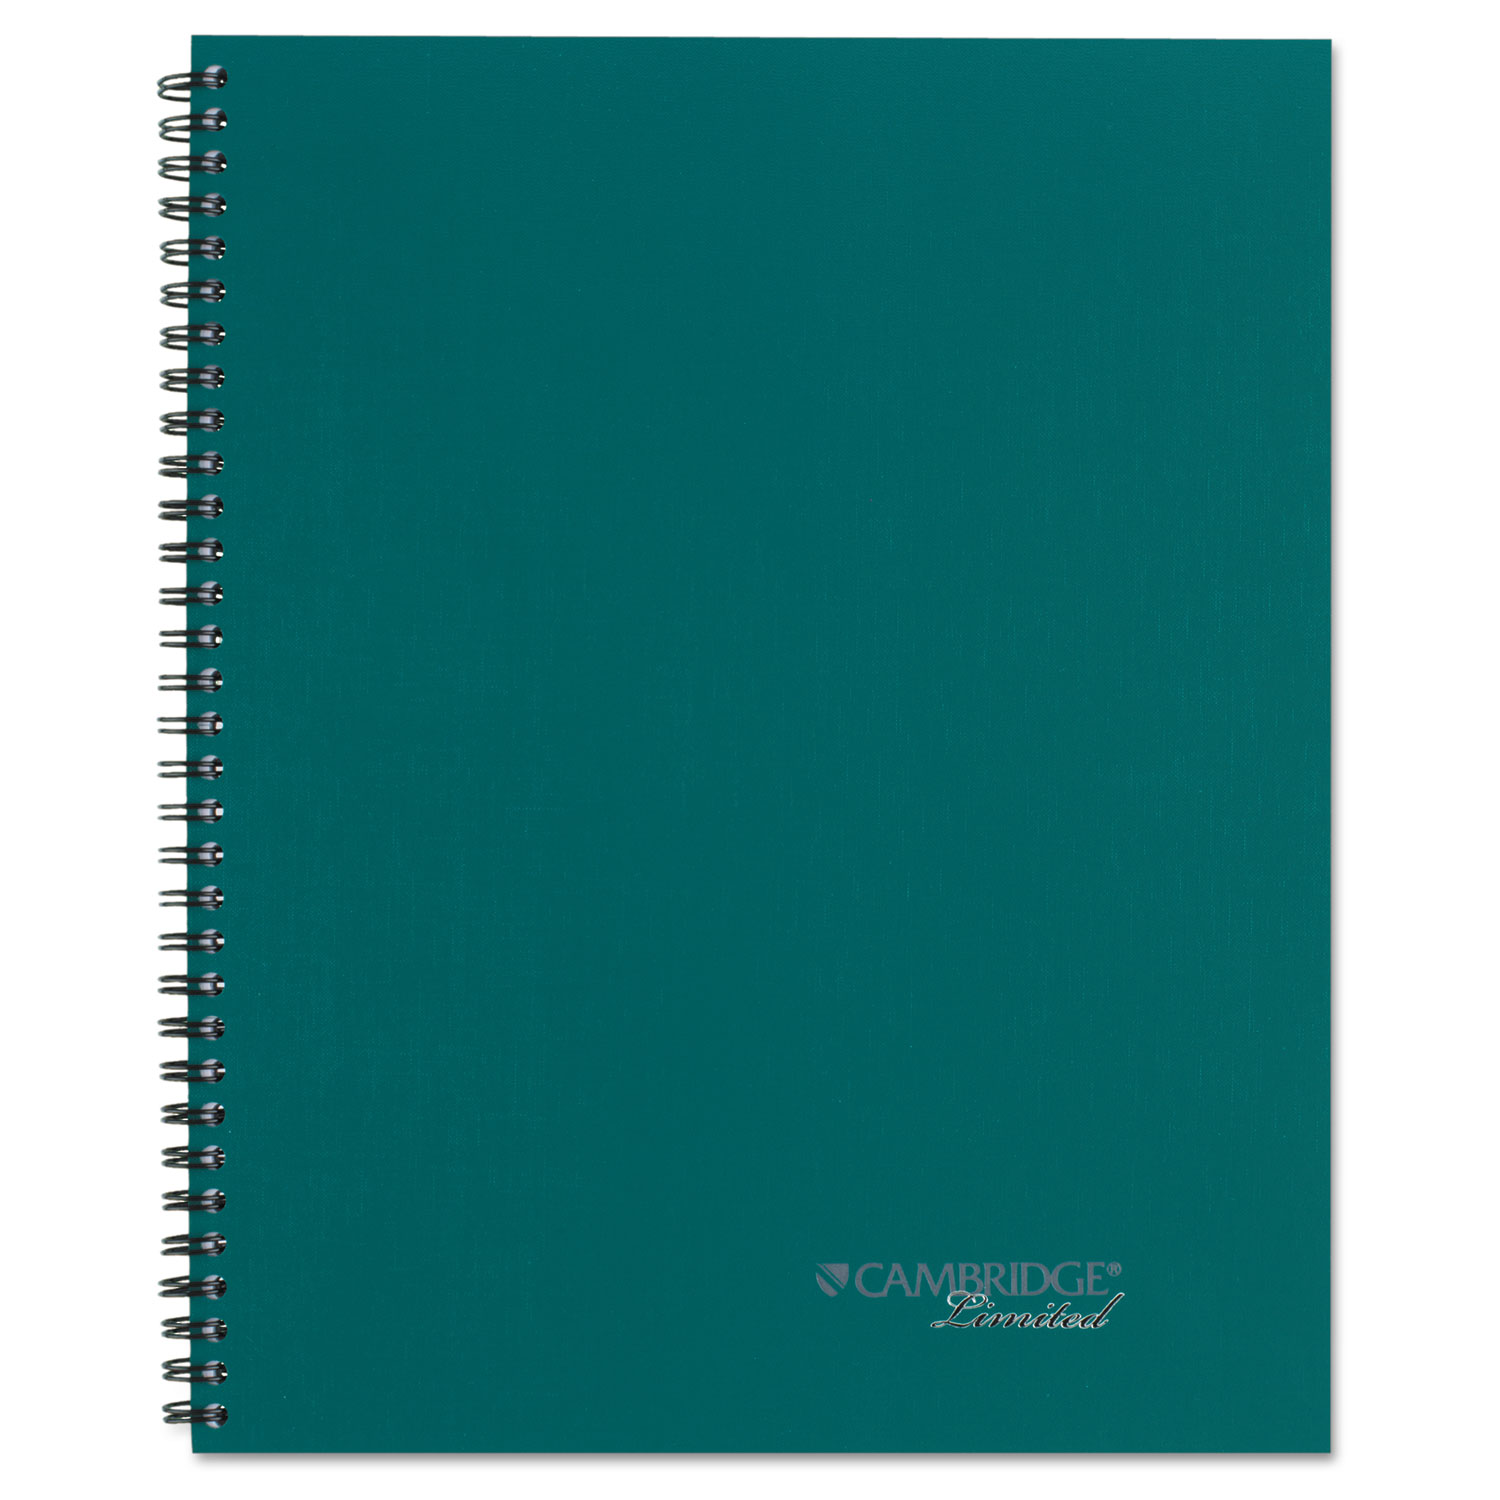  Cambridge 4500642 Wirebound Business Notebook, Wide/Legal Rule, Teal Cover, 9.5 x 7.25, 80 Sheets (MEA45006) 